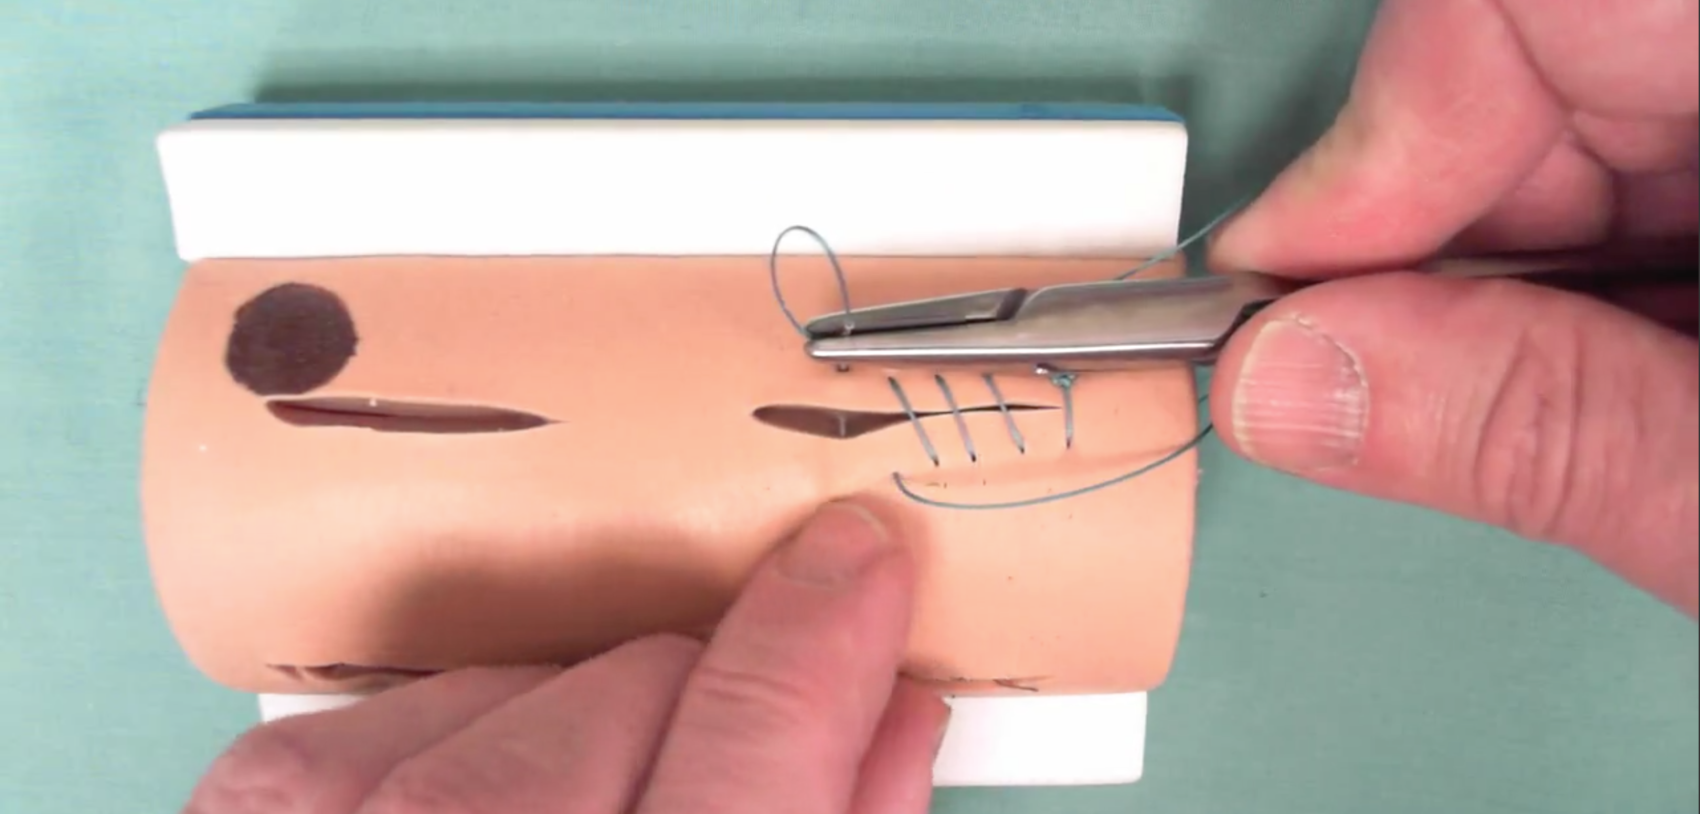 Recording on how to suture